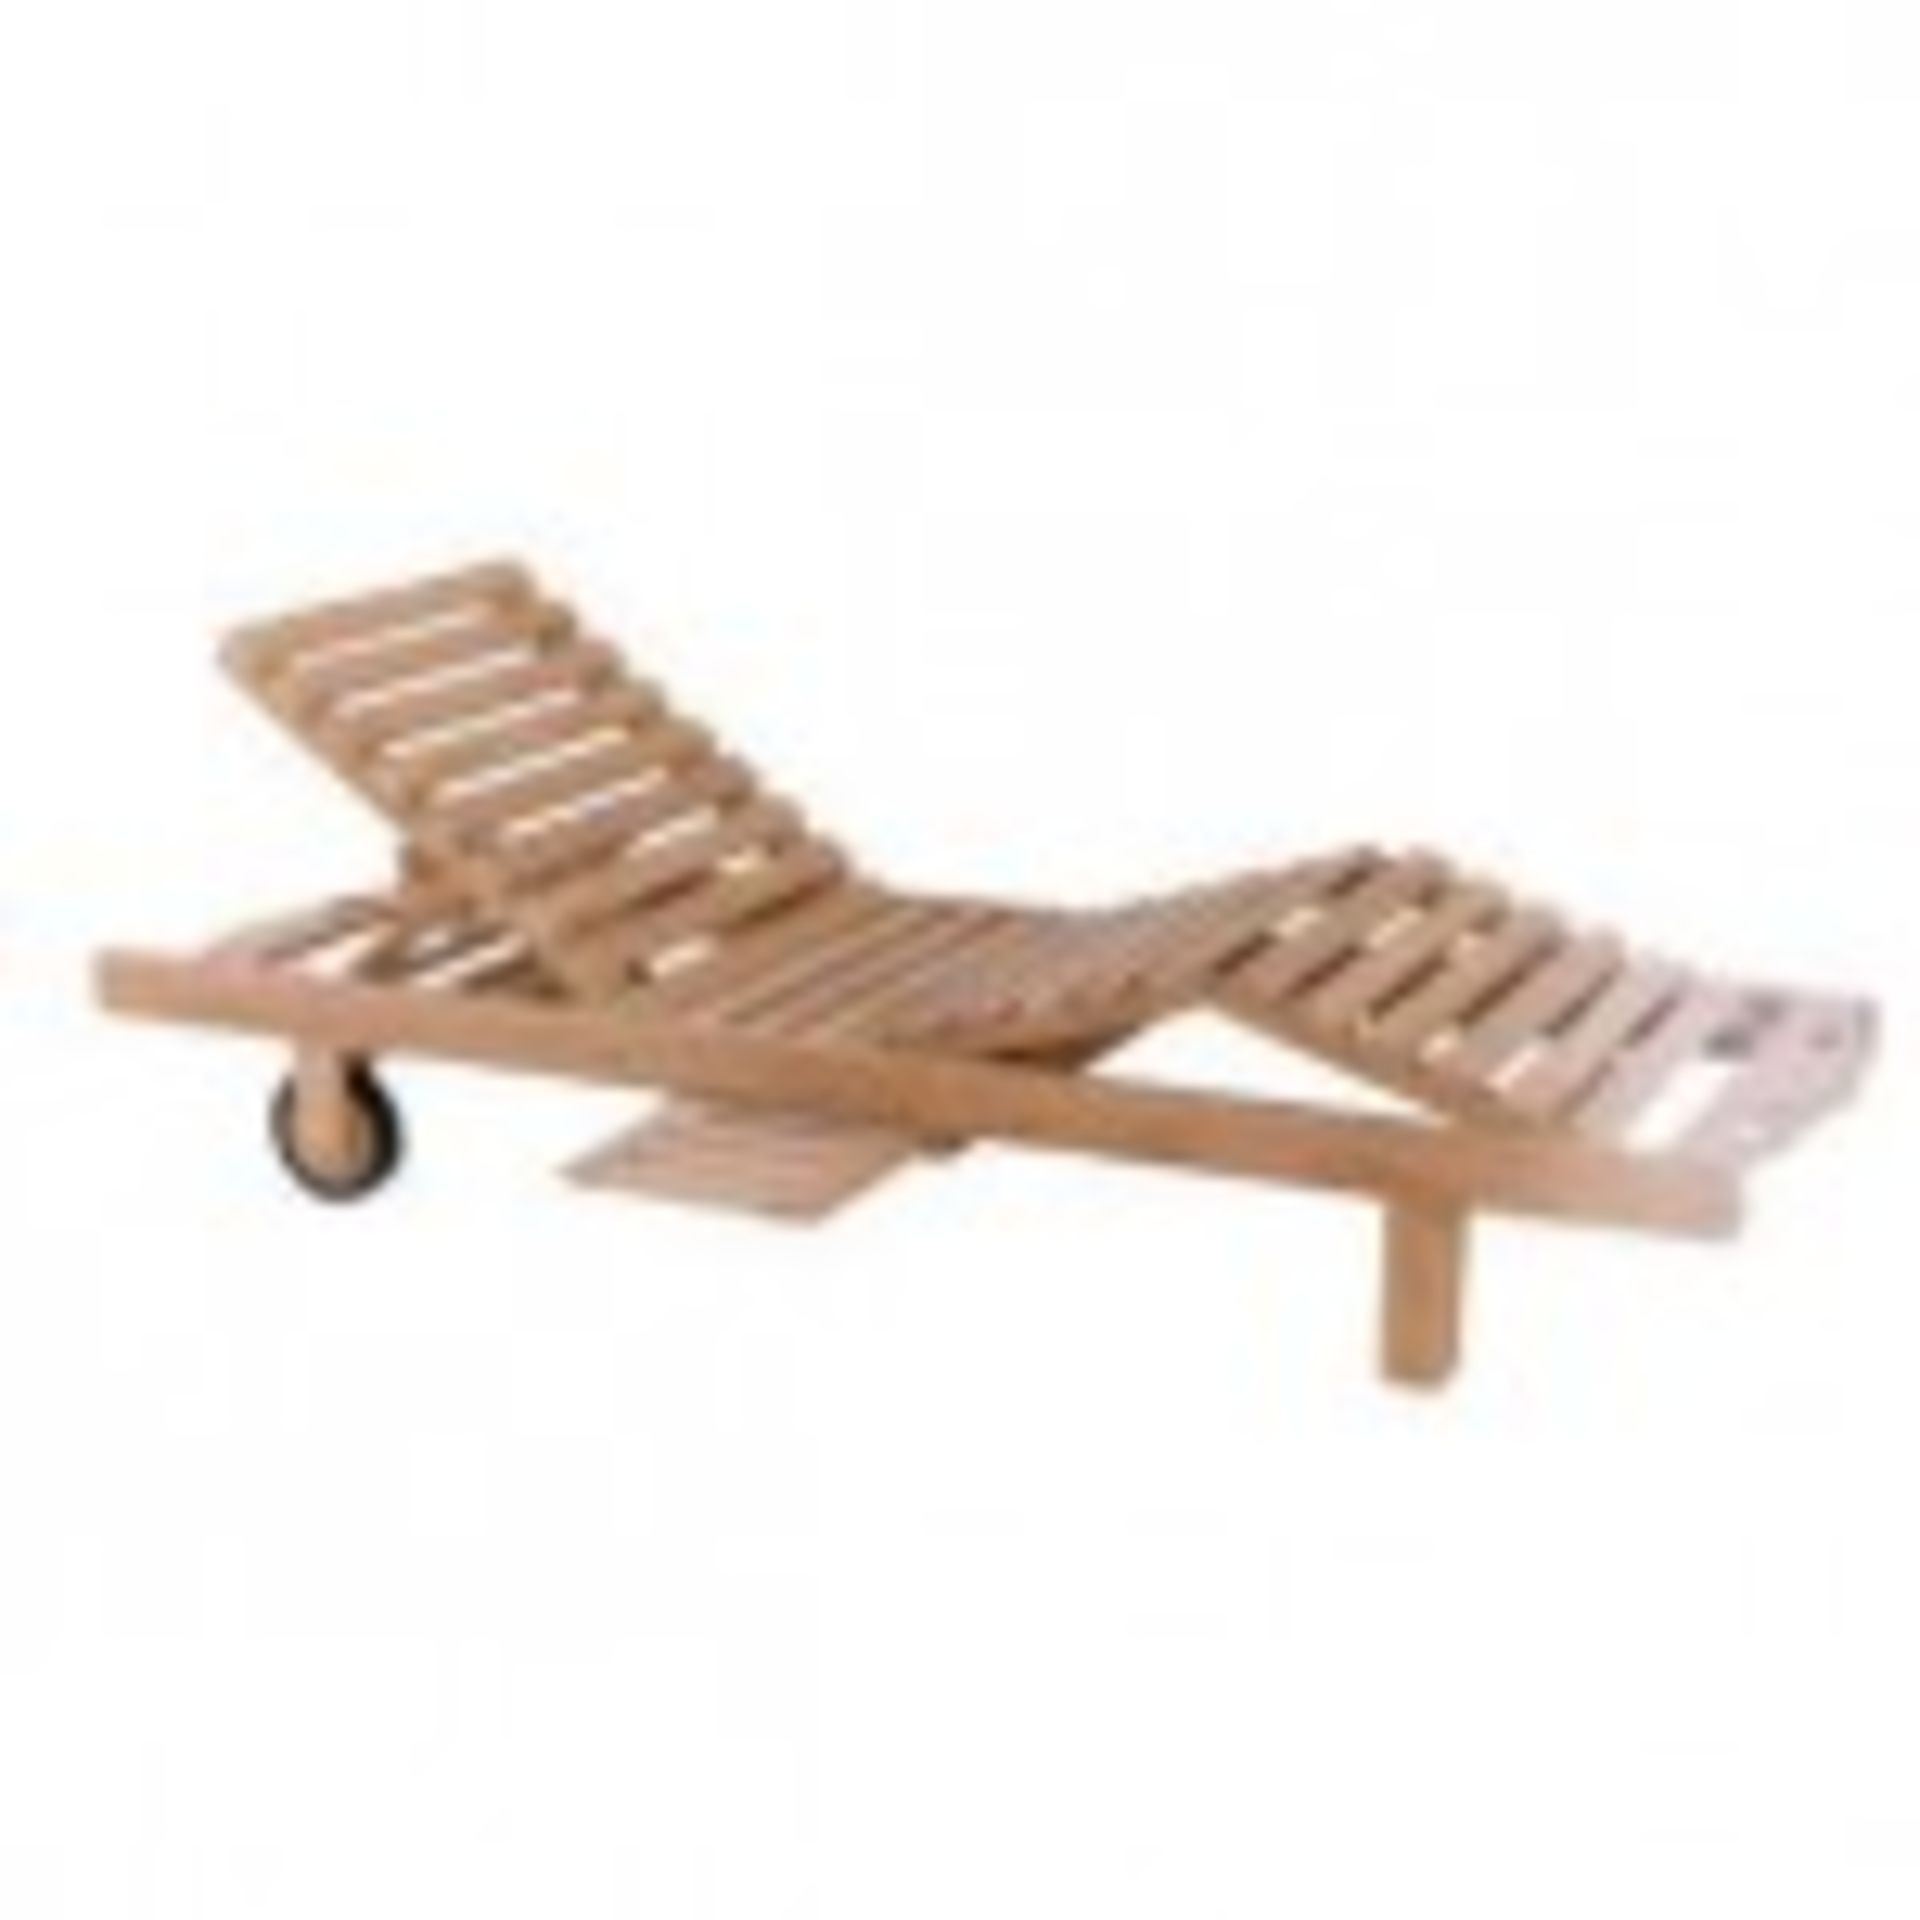 V Brand New Teak Sunlounger, fantastic addition for your garden /Dimensions 209 x 65 x 28/ RRP